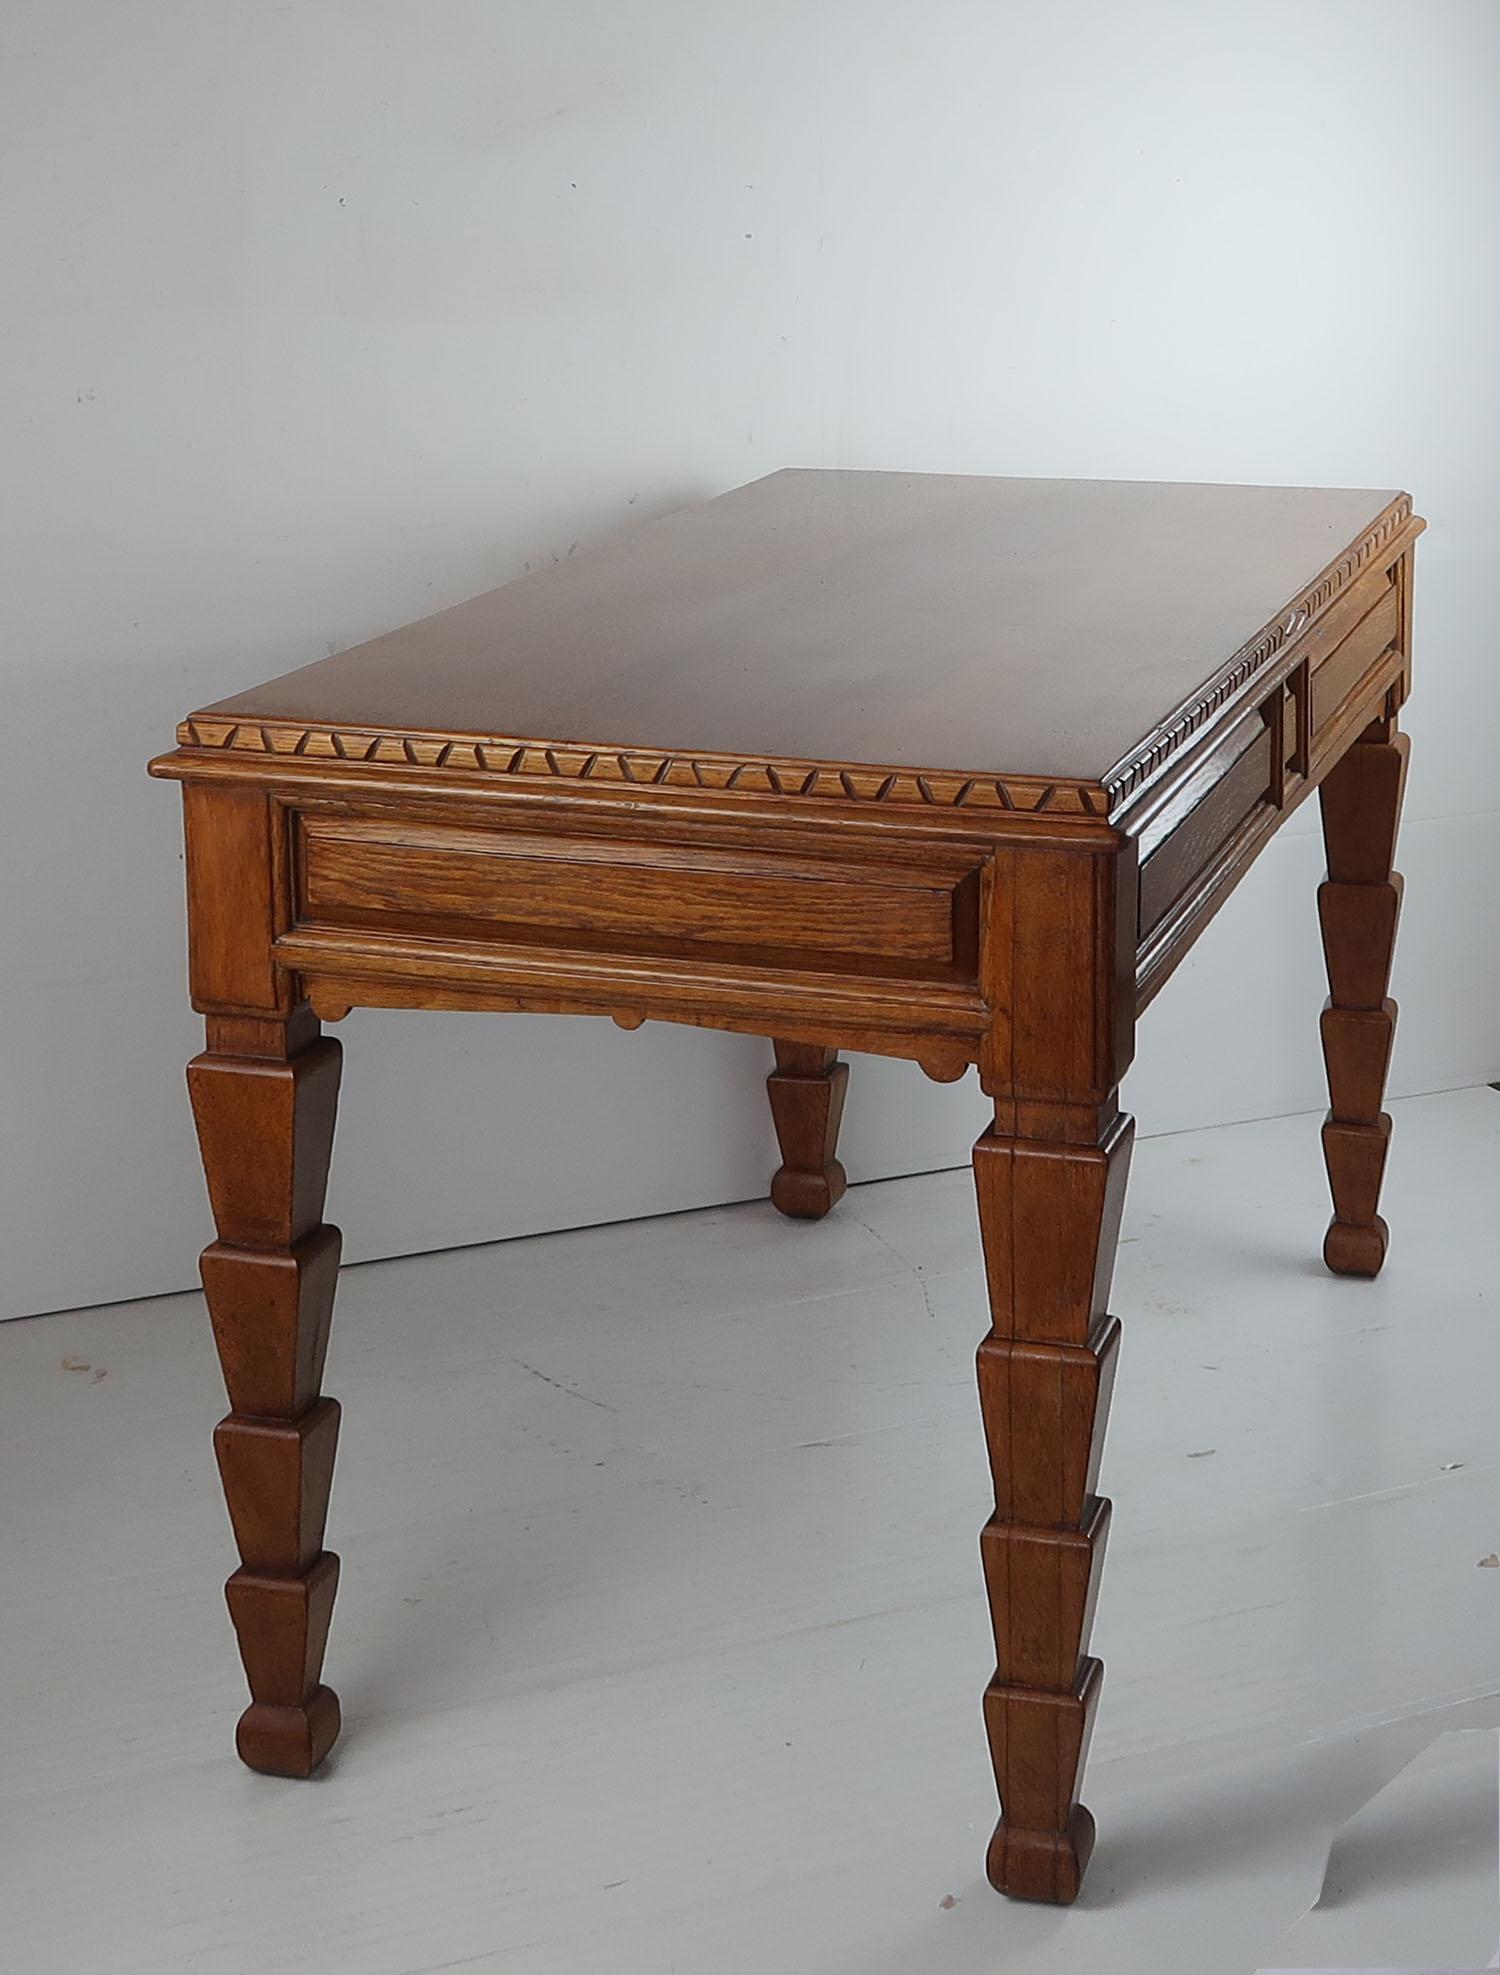 Most unusual library table or desk.

Designer unknown

Beautiful golden oak.

It is freestanding, finished all the way round. No drawers

In aesthetic style. There are elements of Egyptian revival and even Aztec.

Measure: 23 inch leg